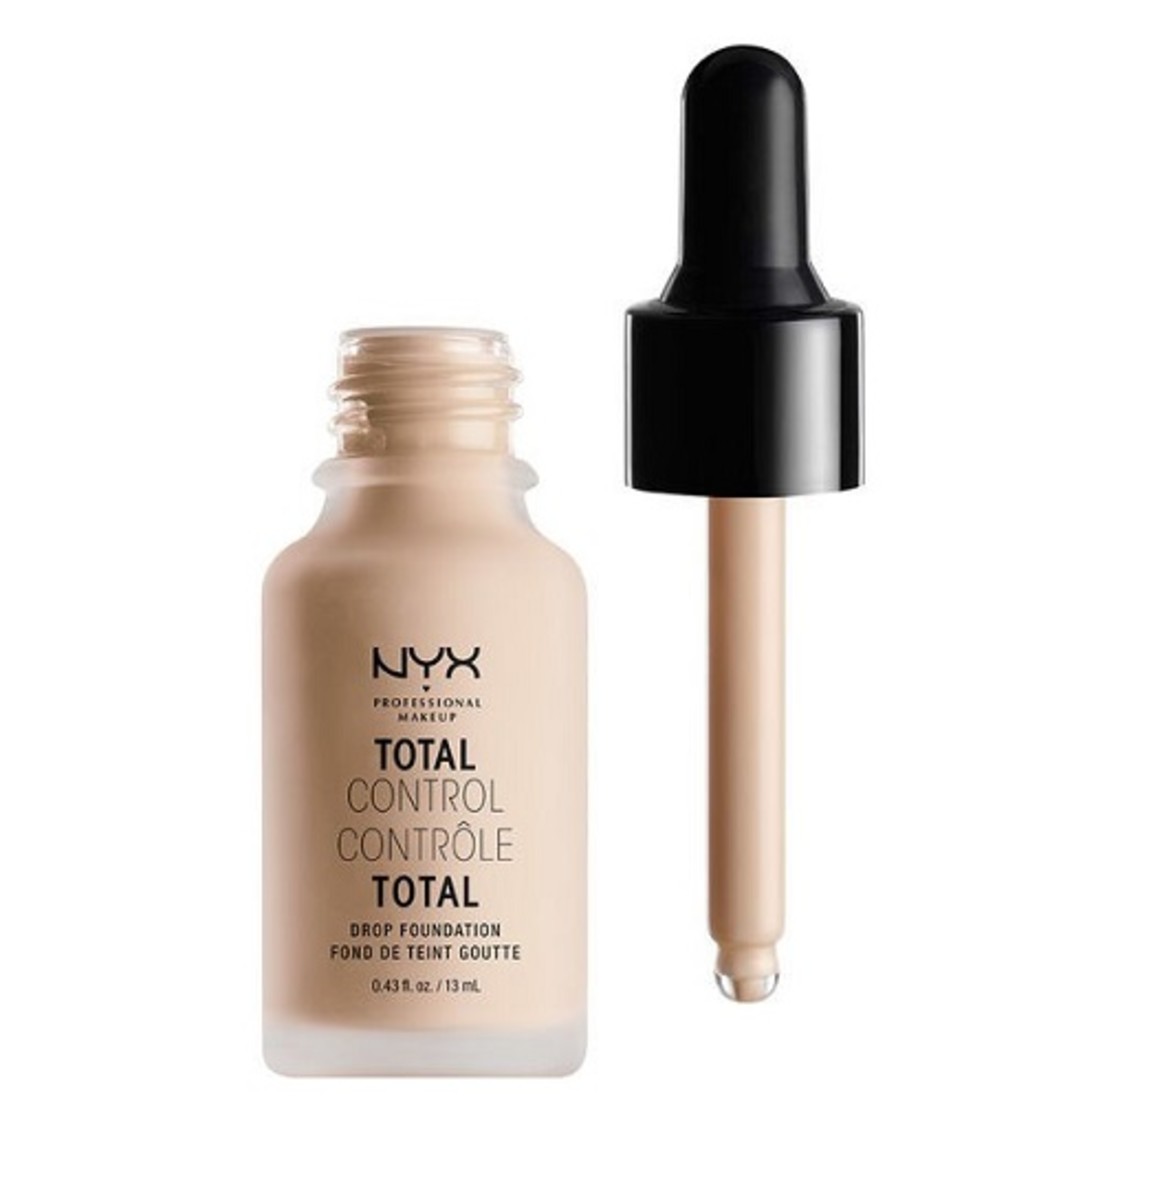 Nyx Total Control Drop Foundation is pricy but user-friendly and effective.